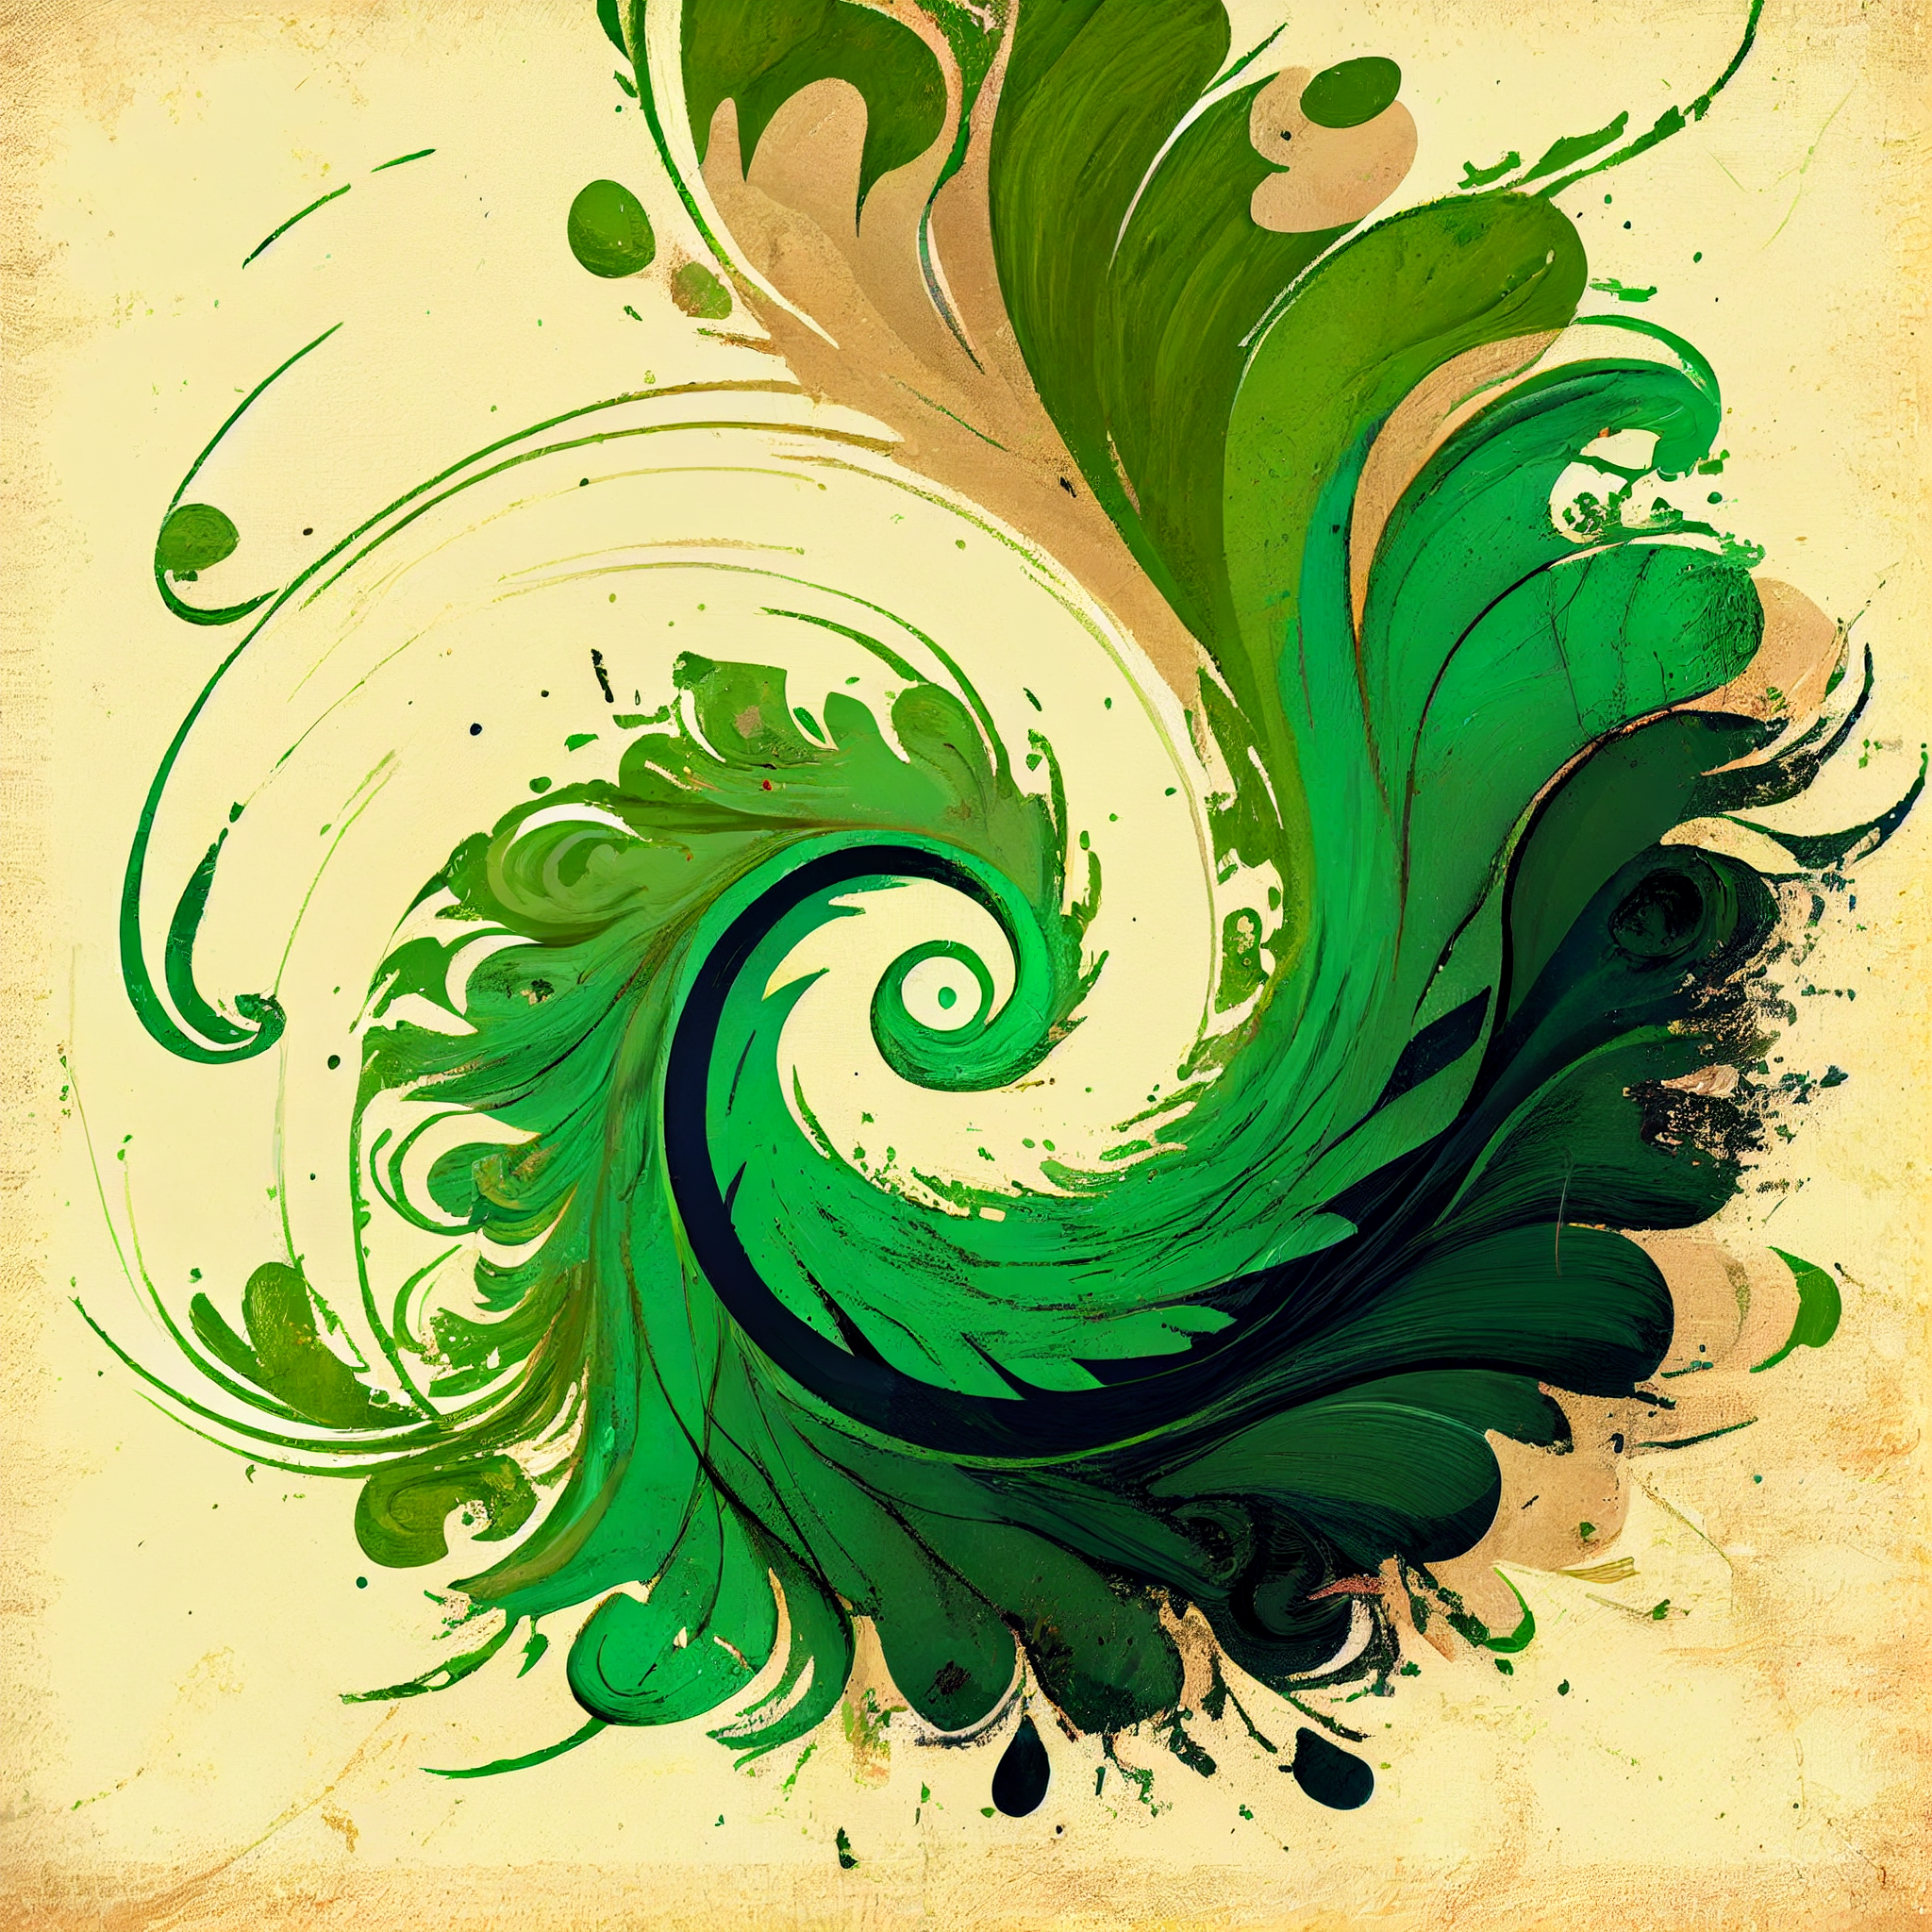 Verdant Swirls: A Beige-Structured Abstract Oil Painting Print with Green Brush Strokes